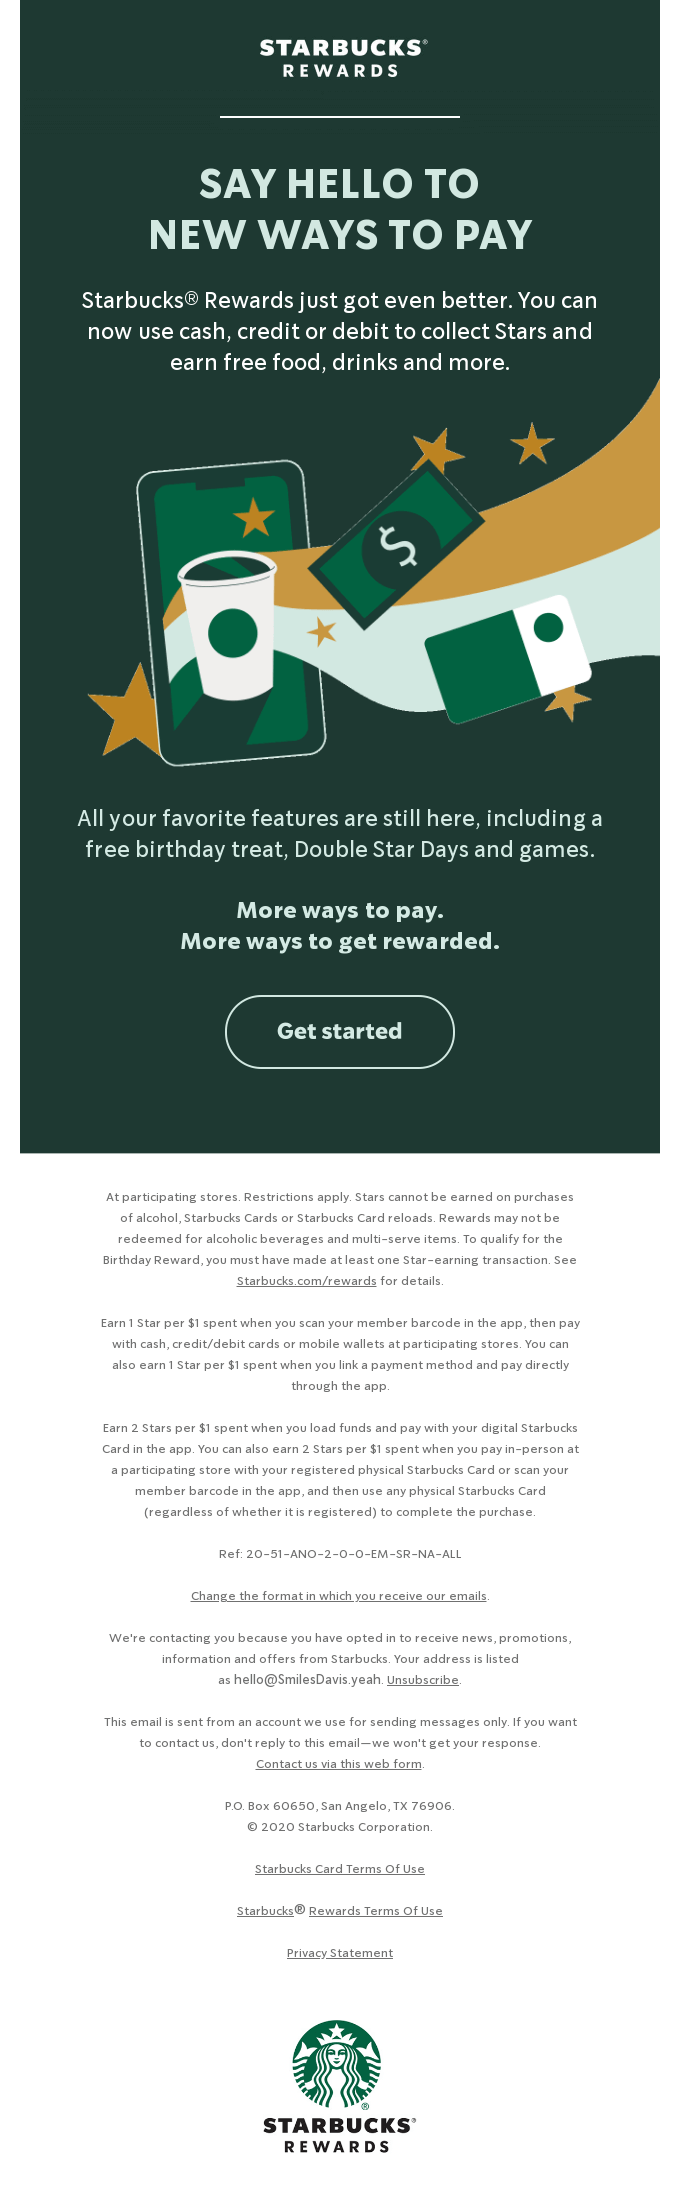 Example of Email Campaign by Starbucks